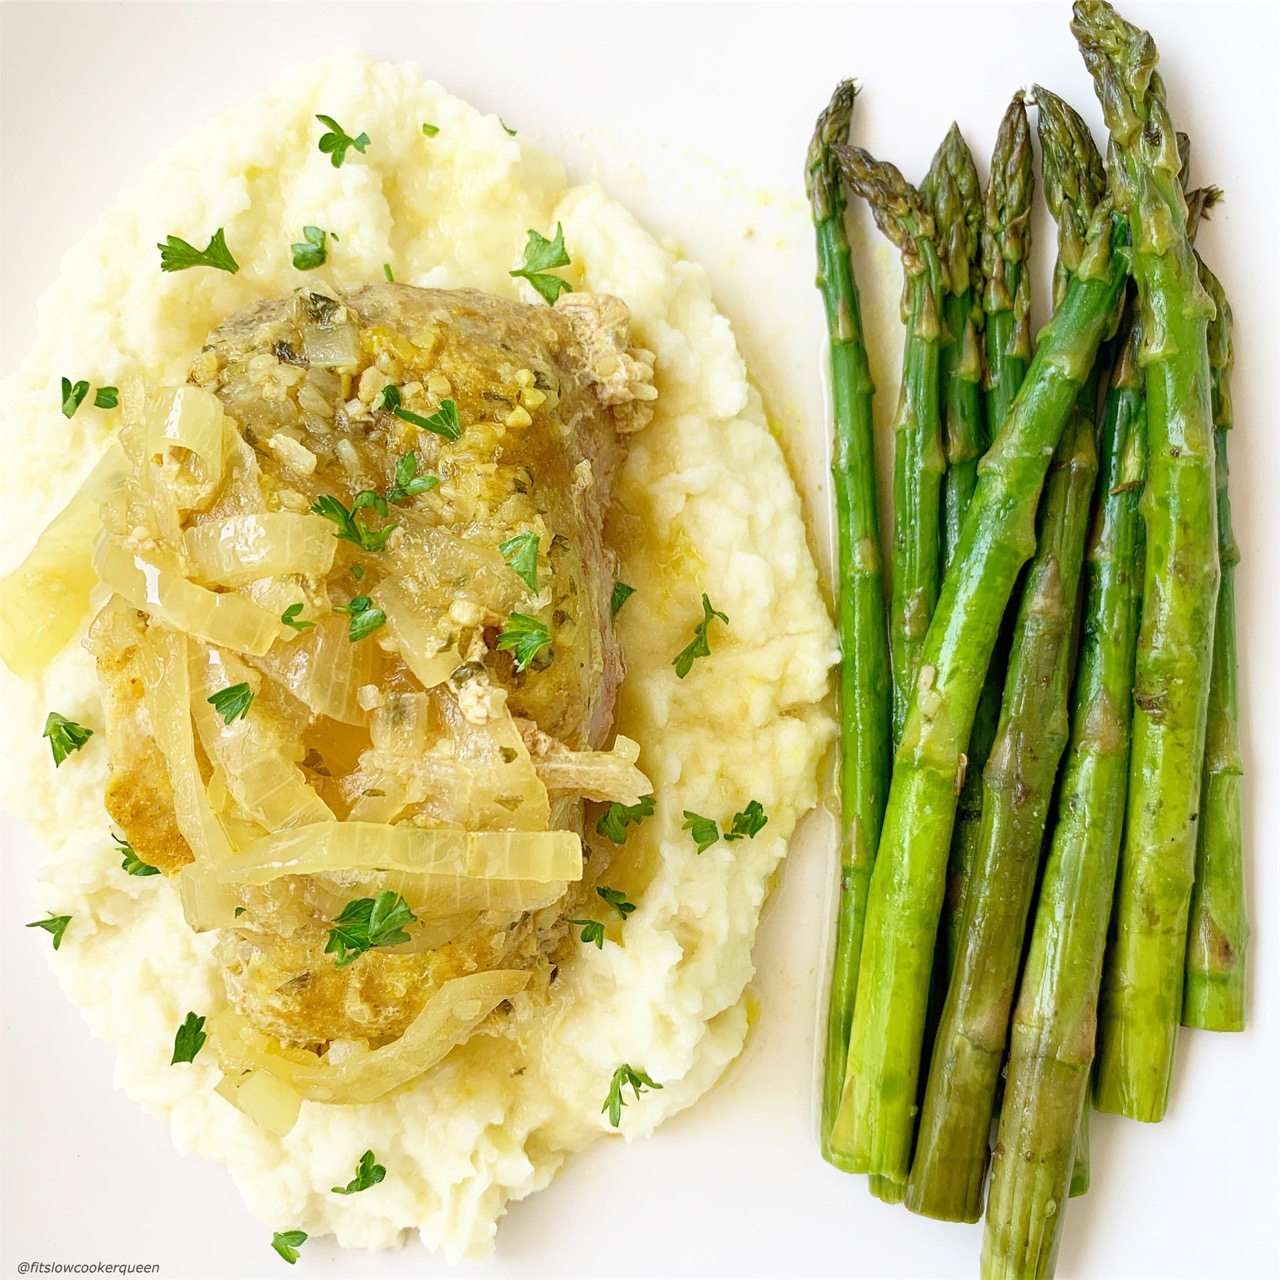 Front view of onion pork chops on top of mashed cauliflower and asparagus.